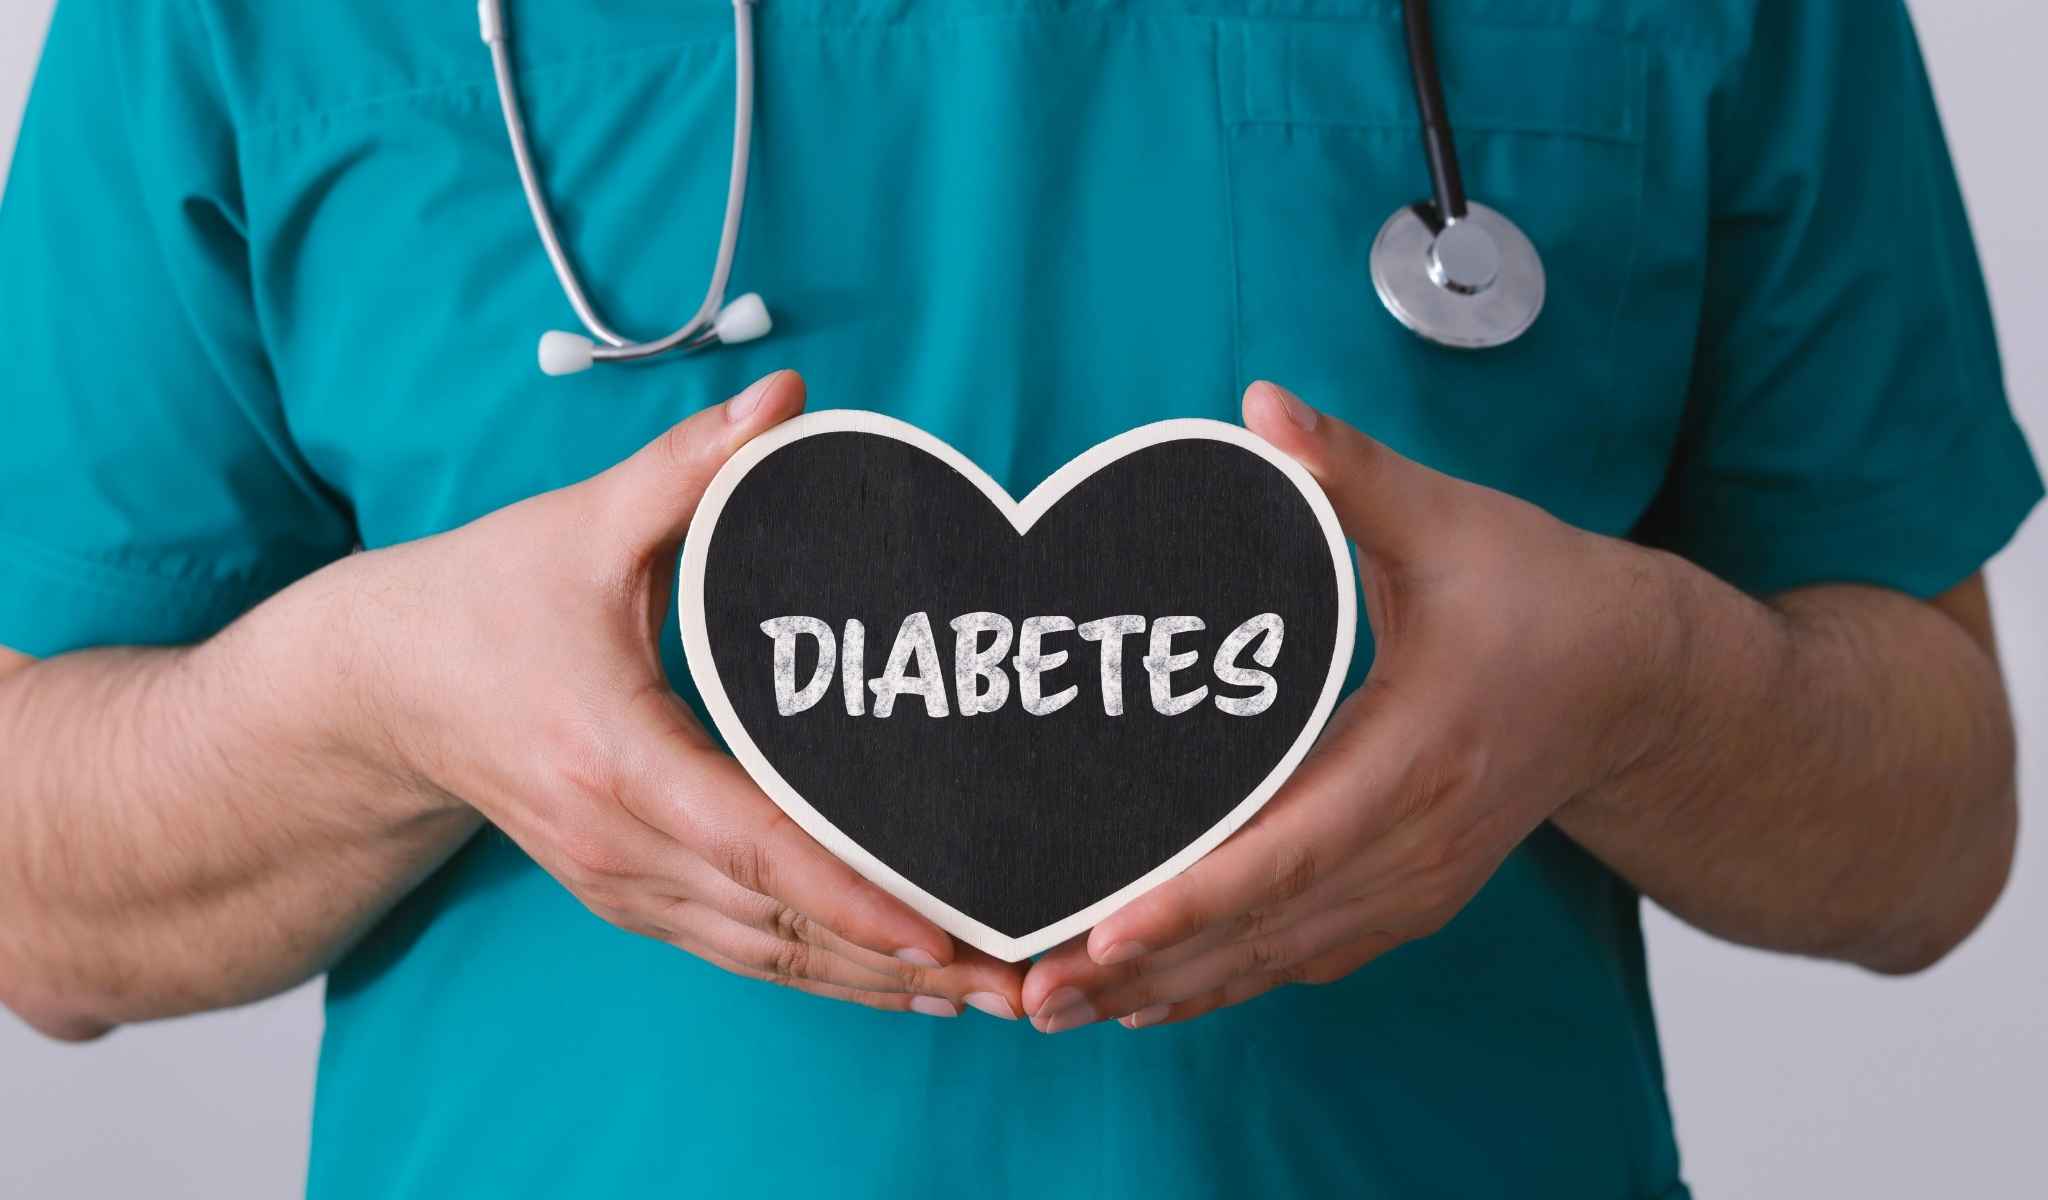 CBD Oil For Diabetes: Therapeutic Benefits and Risks